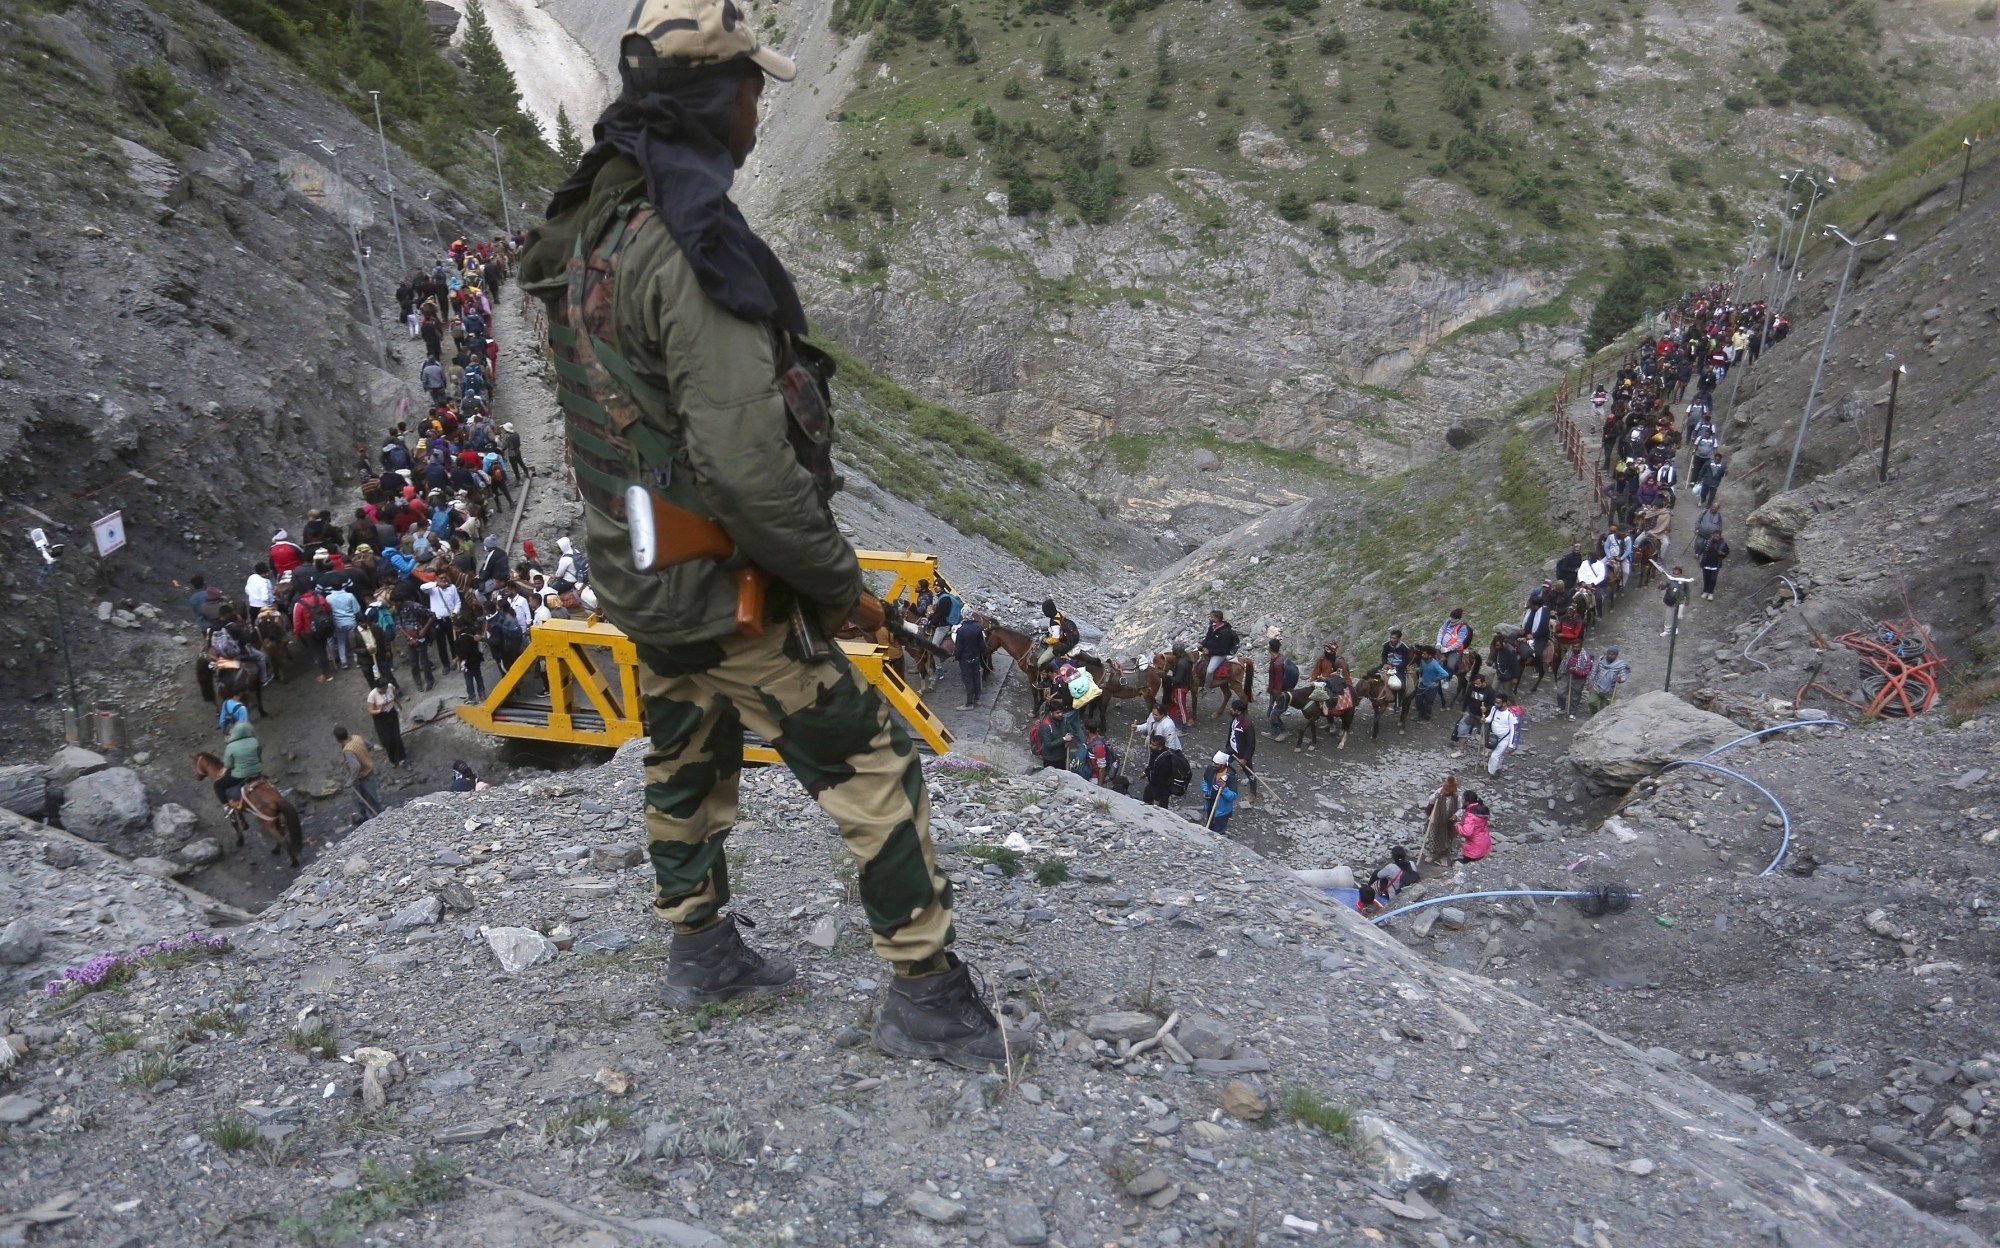 Over 3.5 lakh devotees had ‘Darshan’ inside Amarnath cave shrine over the last 19 days